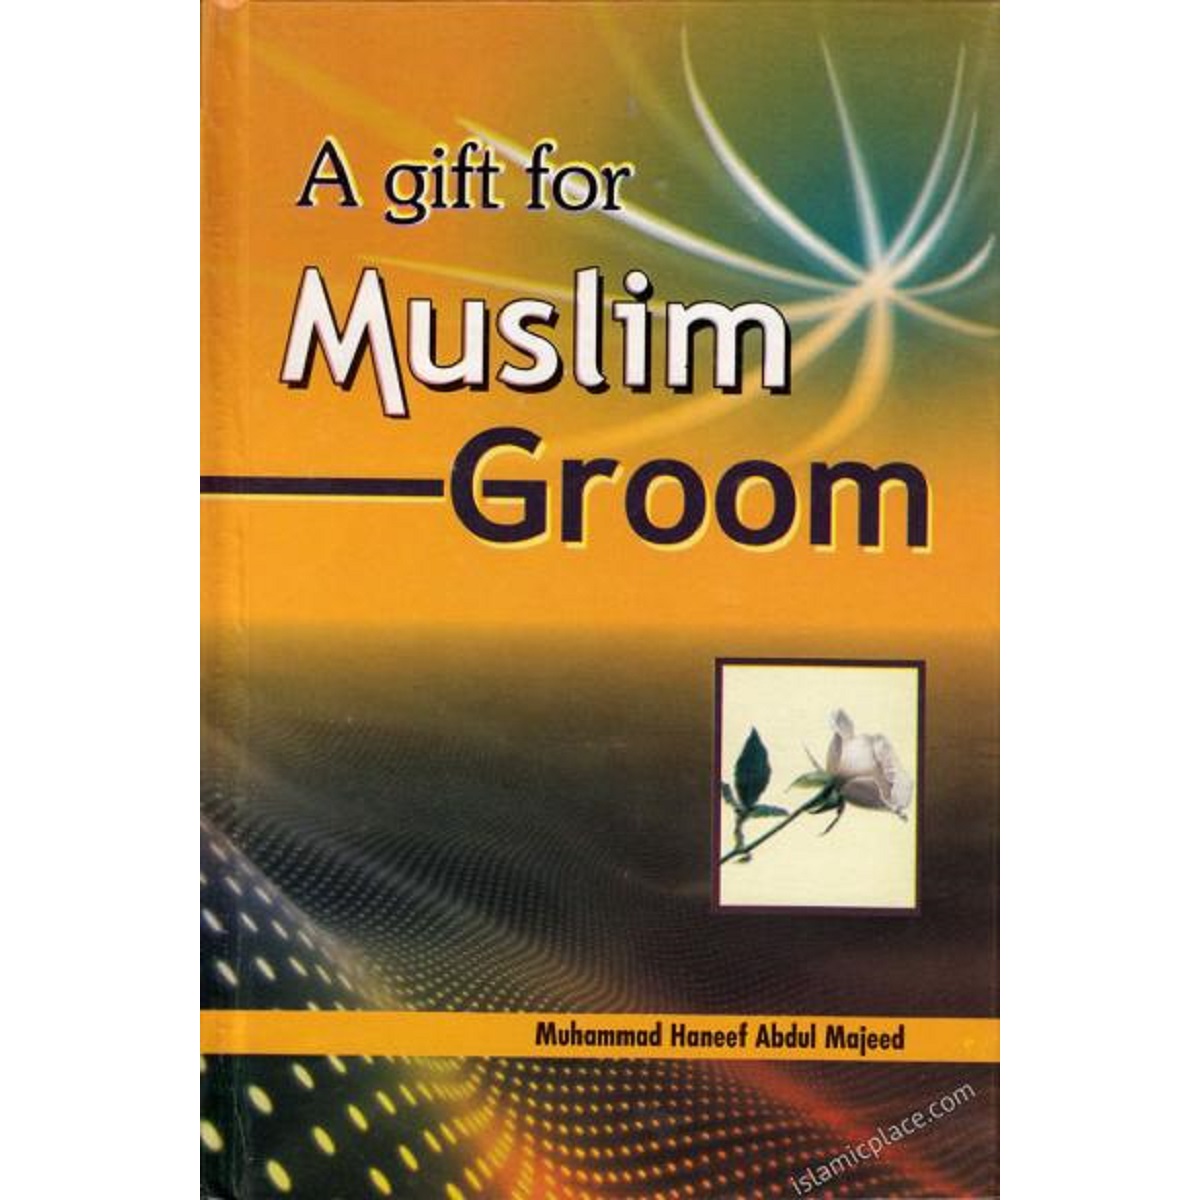 https://www.tarbiyahbooksplus.com/shop/family-lifewomen/a-gift-for-muslim-groom-a-guide-for-joyous-and-successful-married-life/